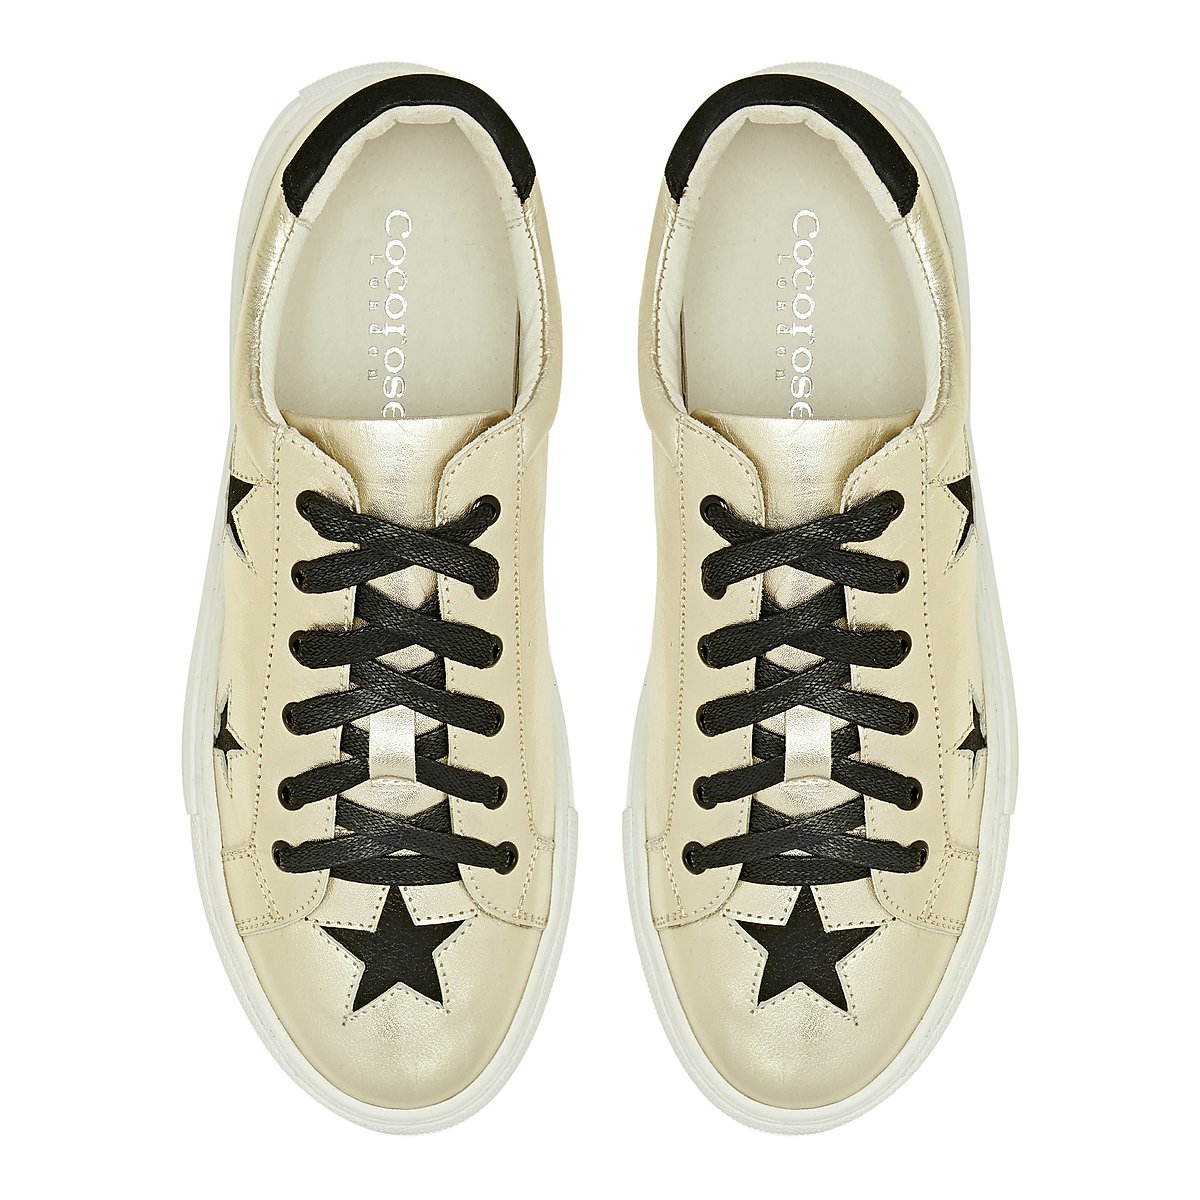 Cocorose London Hoxton Gold with Black Stars comfort trainers